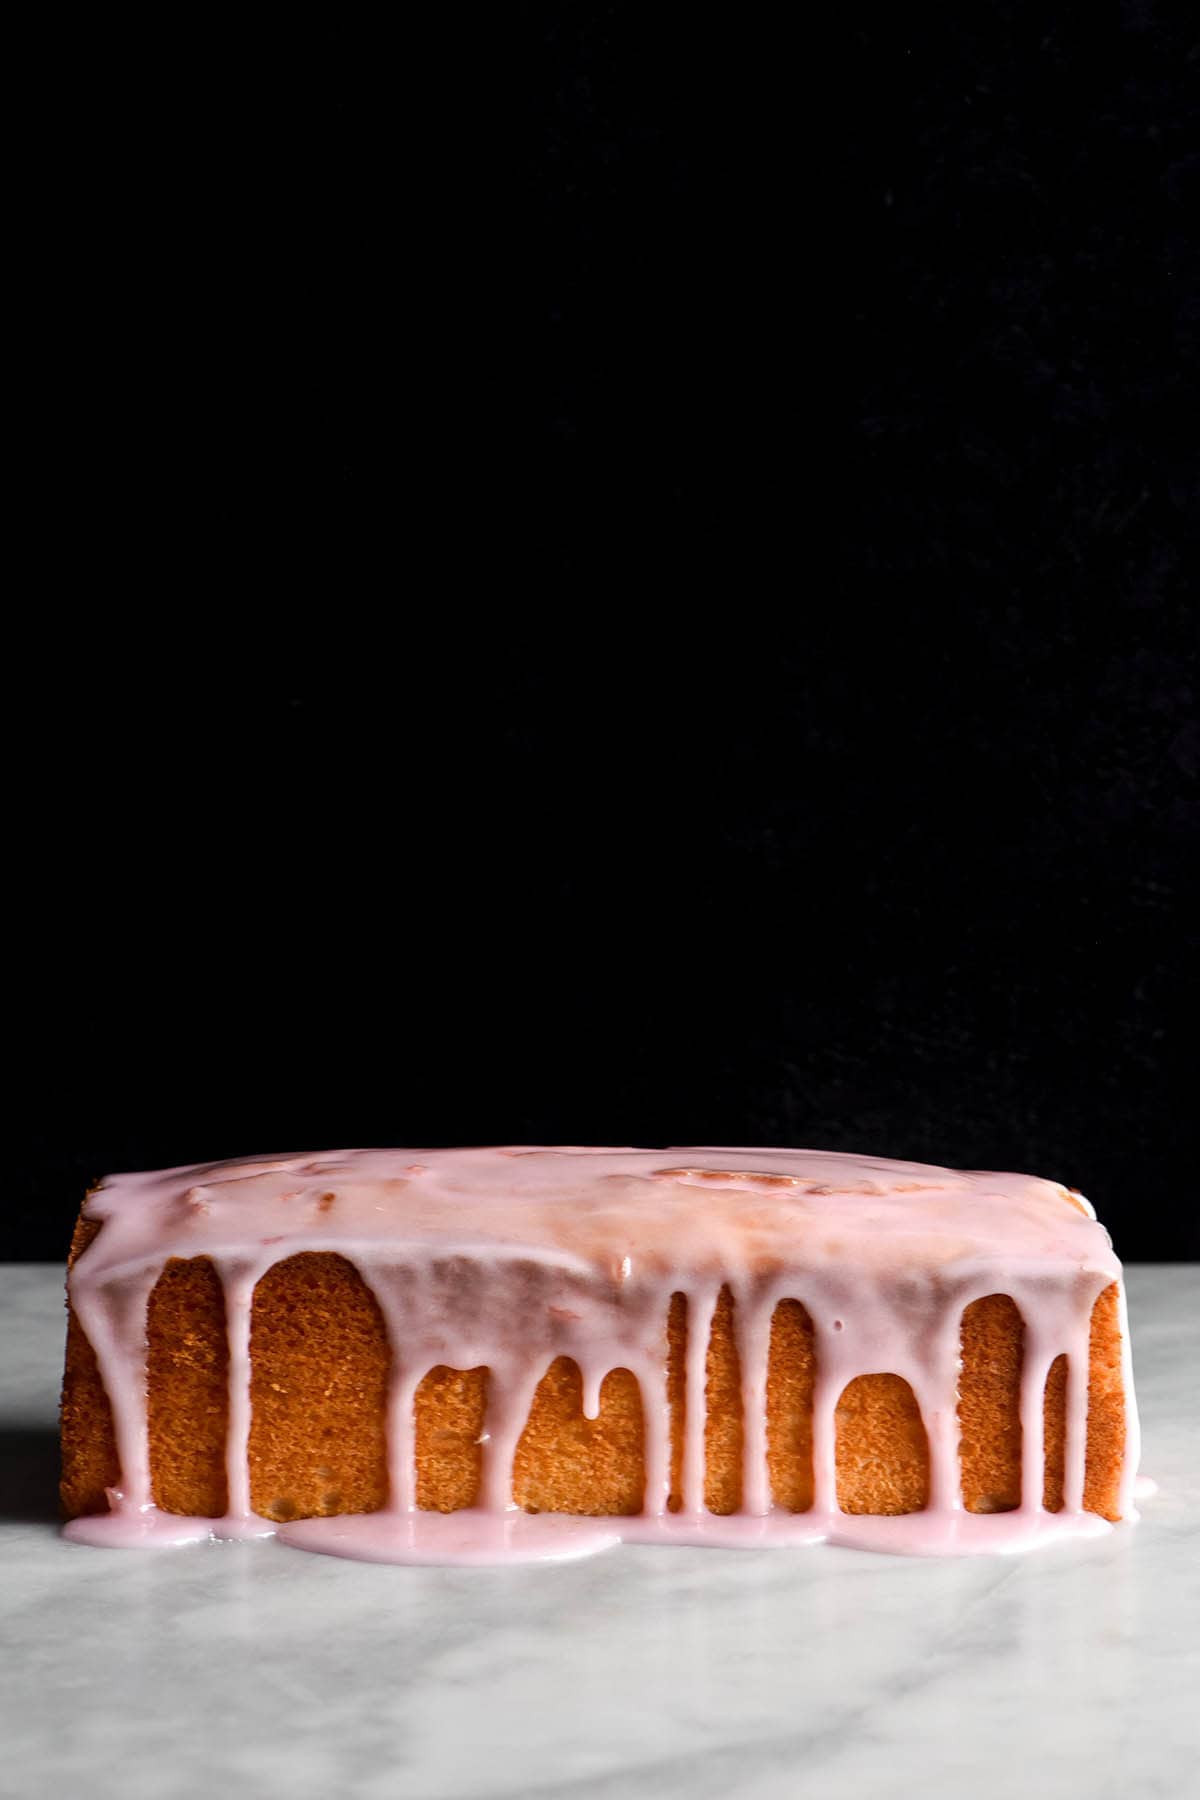 A side on view of a loaf of gluten free vanilla cake. It sits on a white marble table with a black background. The loaf is golden brown and drizzled with a light pink icing which snakes down the side of the loaf